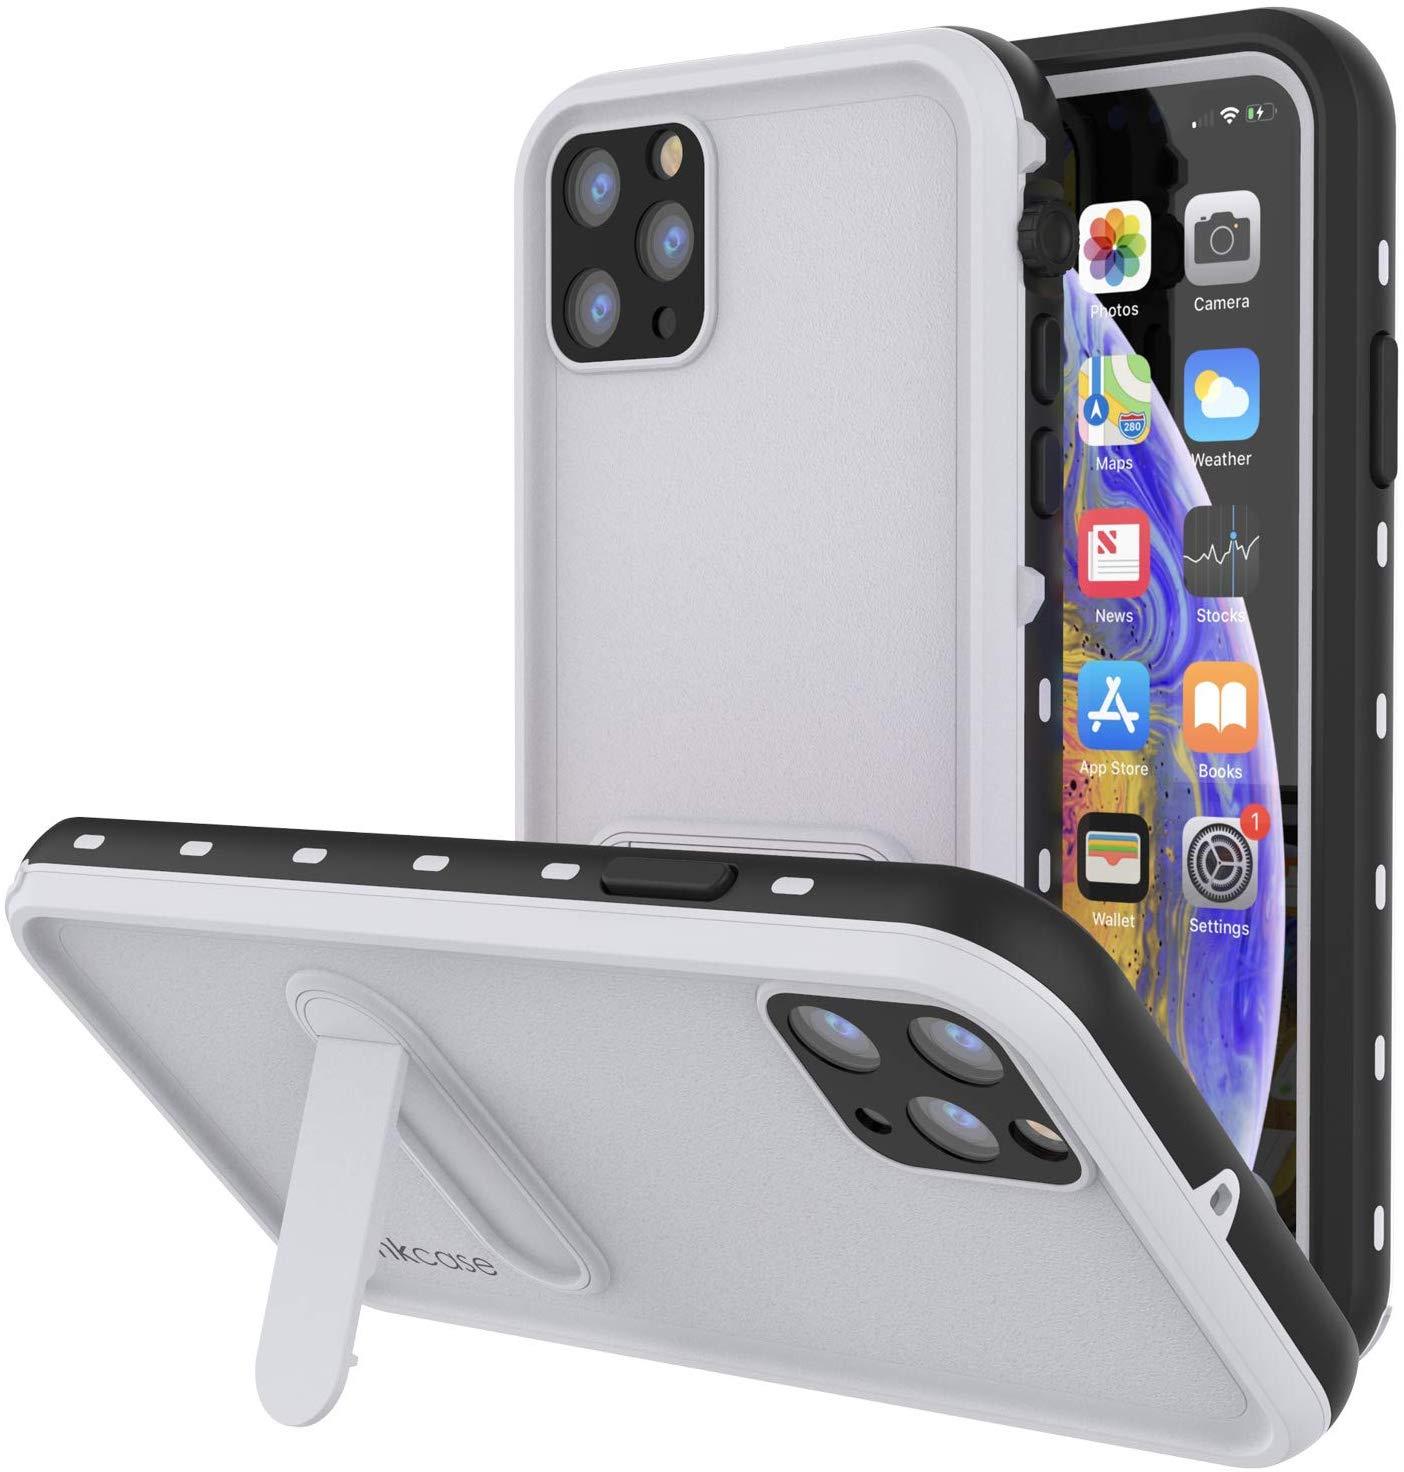 iPhone 11 Pro Max Waterproof Case, Punkcase [KickStud Series] Armor Cover [White]